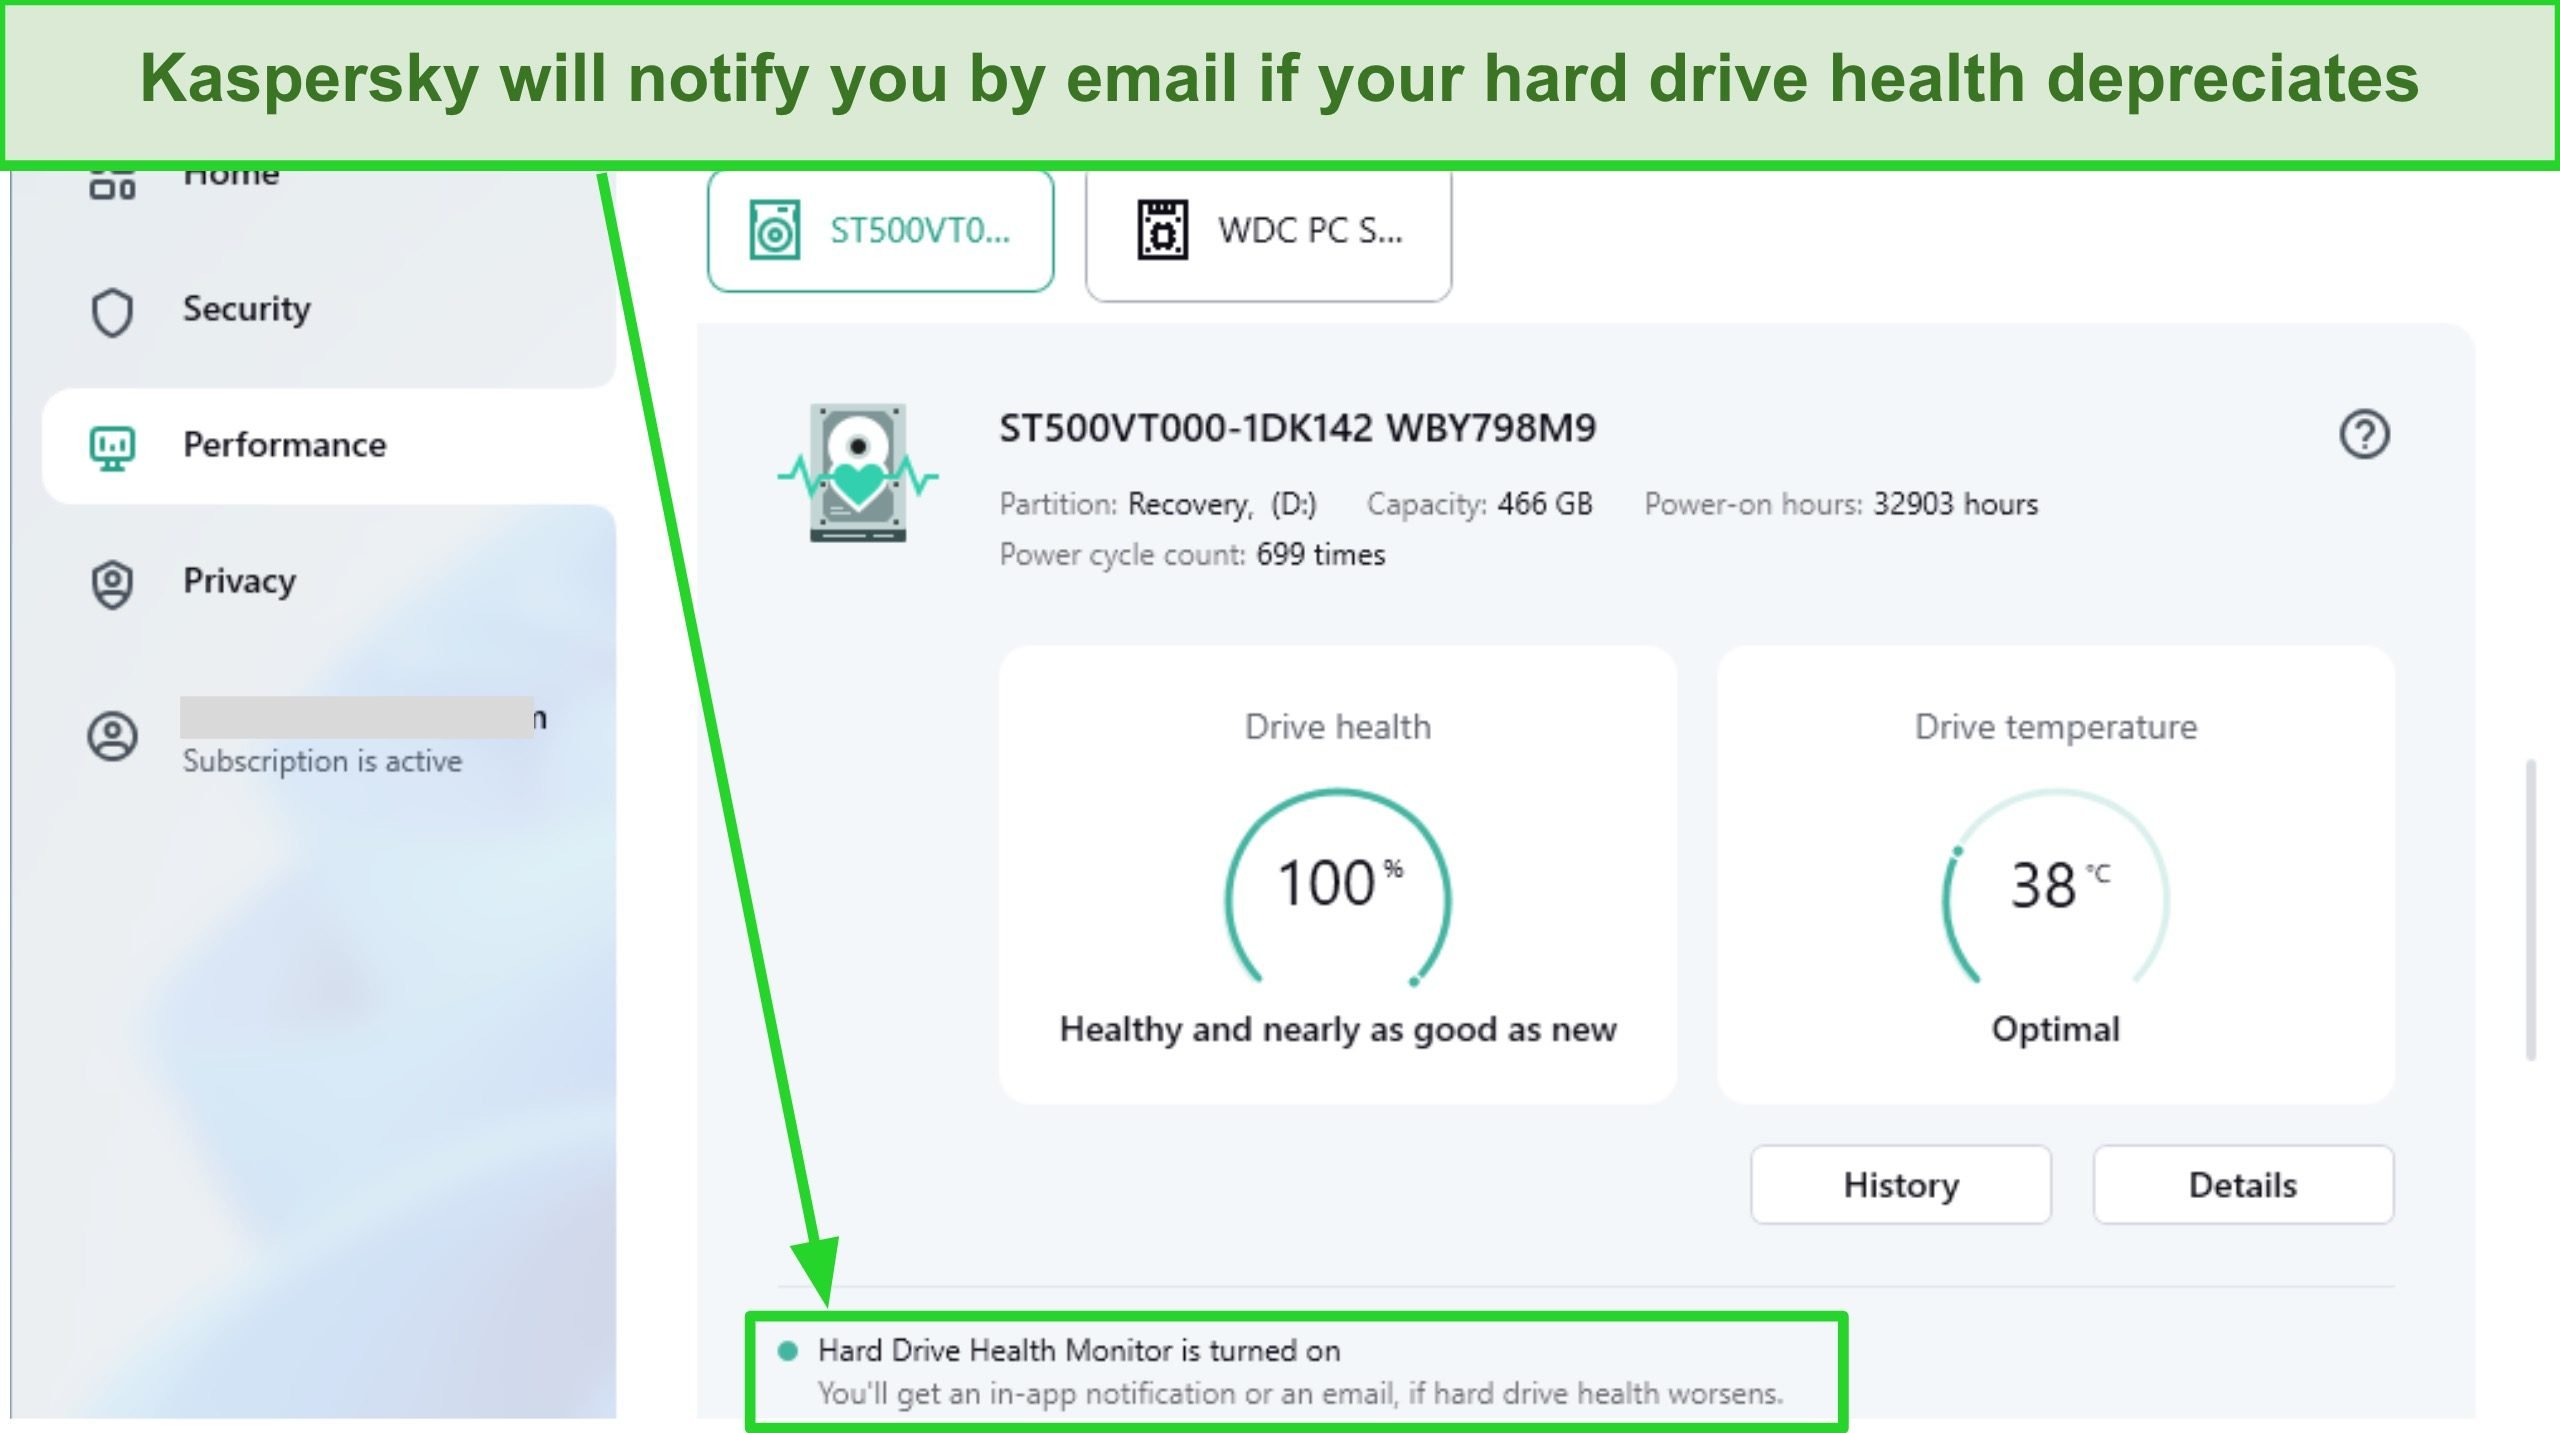 Kaspersky monitors your hard drive health and lets you know if it worsens